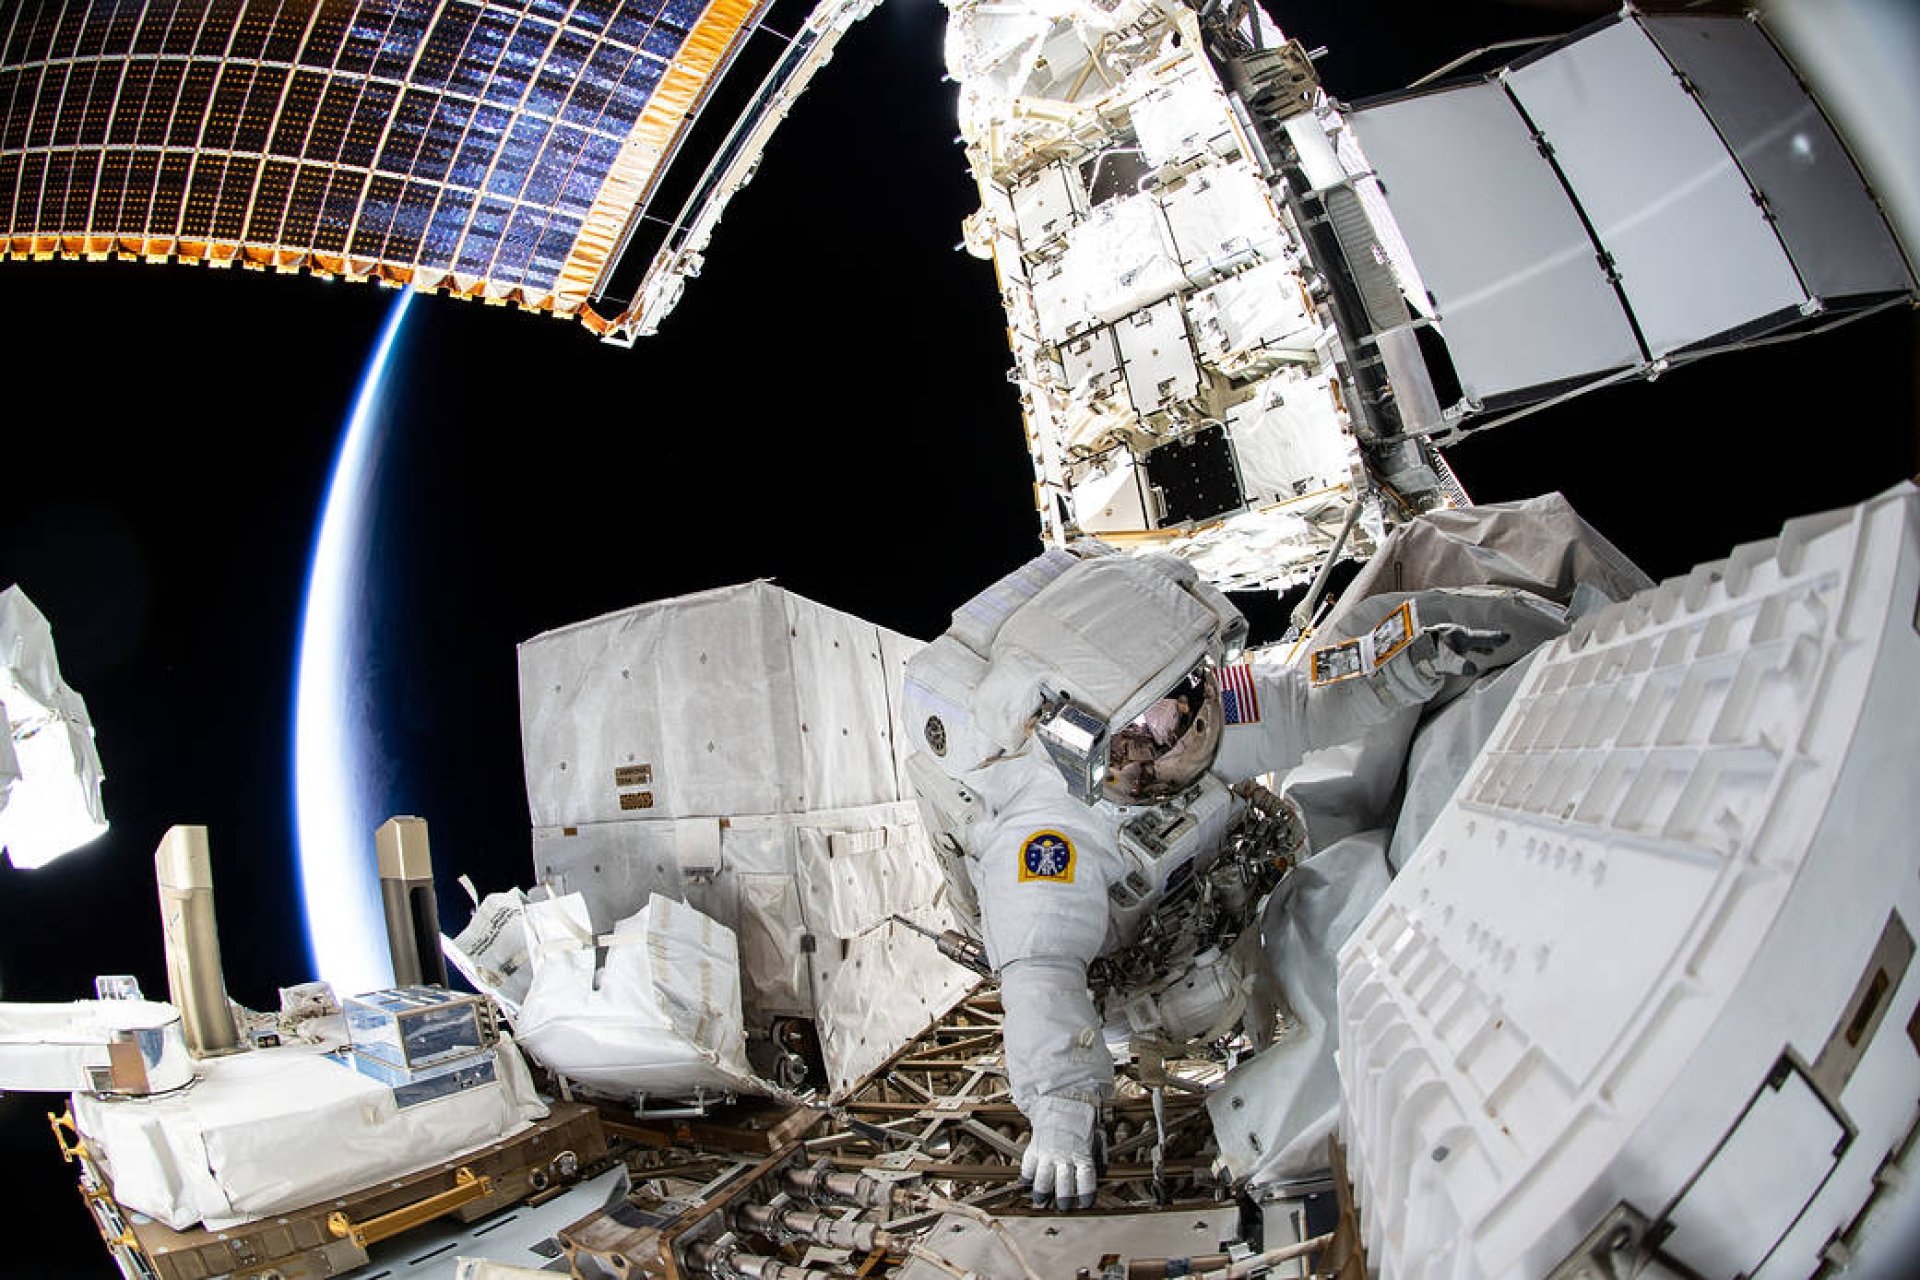 NASA spacewalker Kayla Barron is pictured during a six-hour and 32 minute spacewalk.